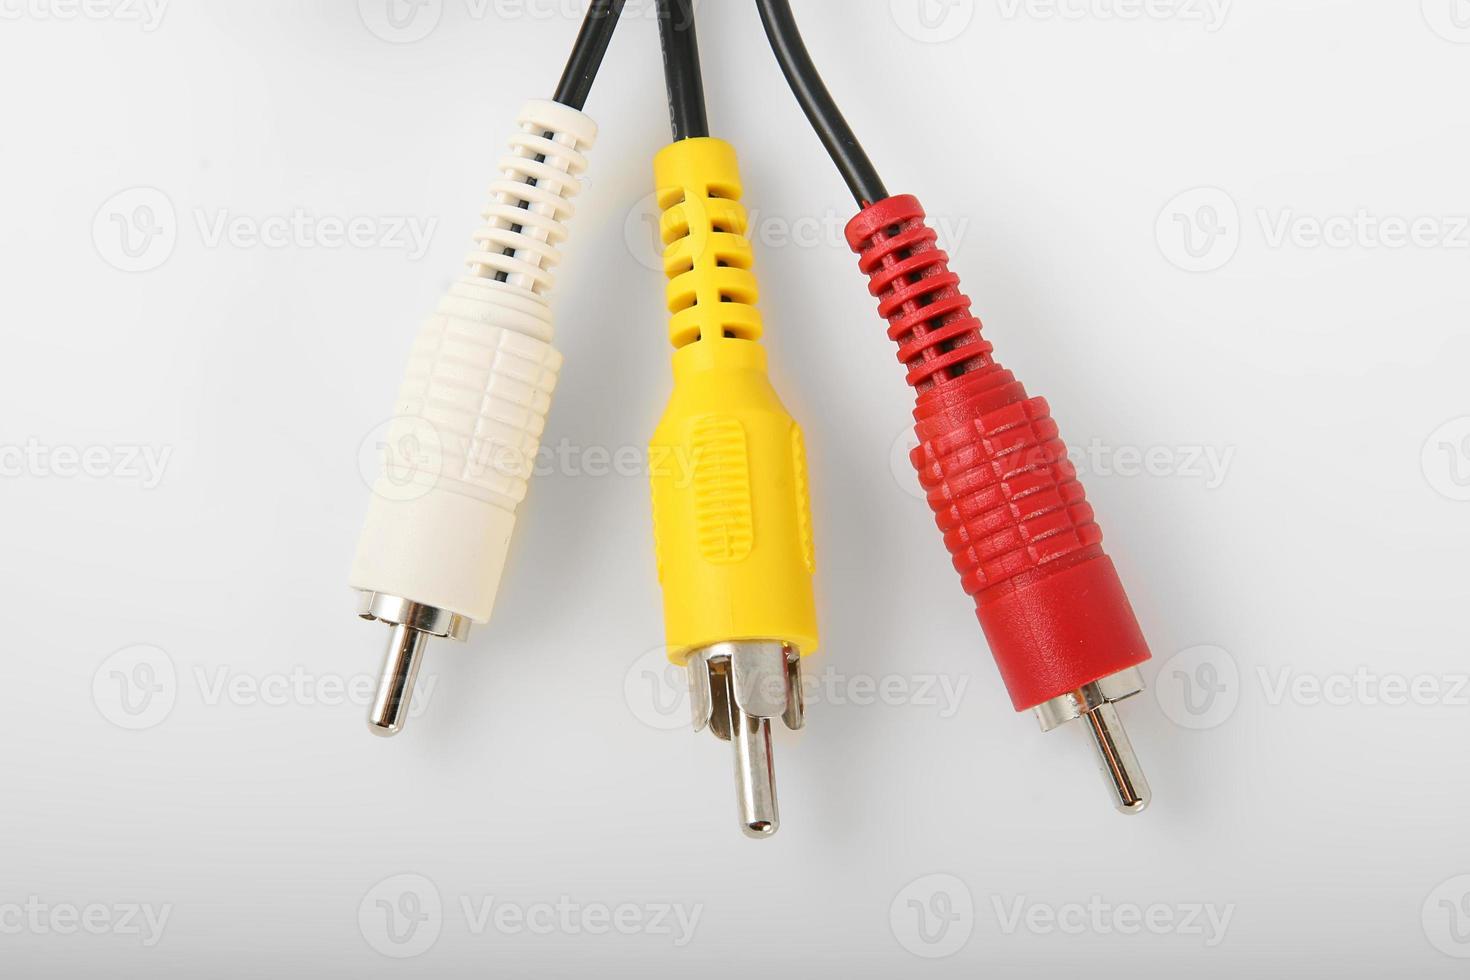 RCA Cables on white background photo